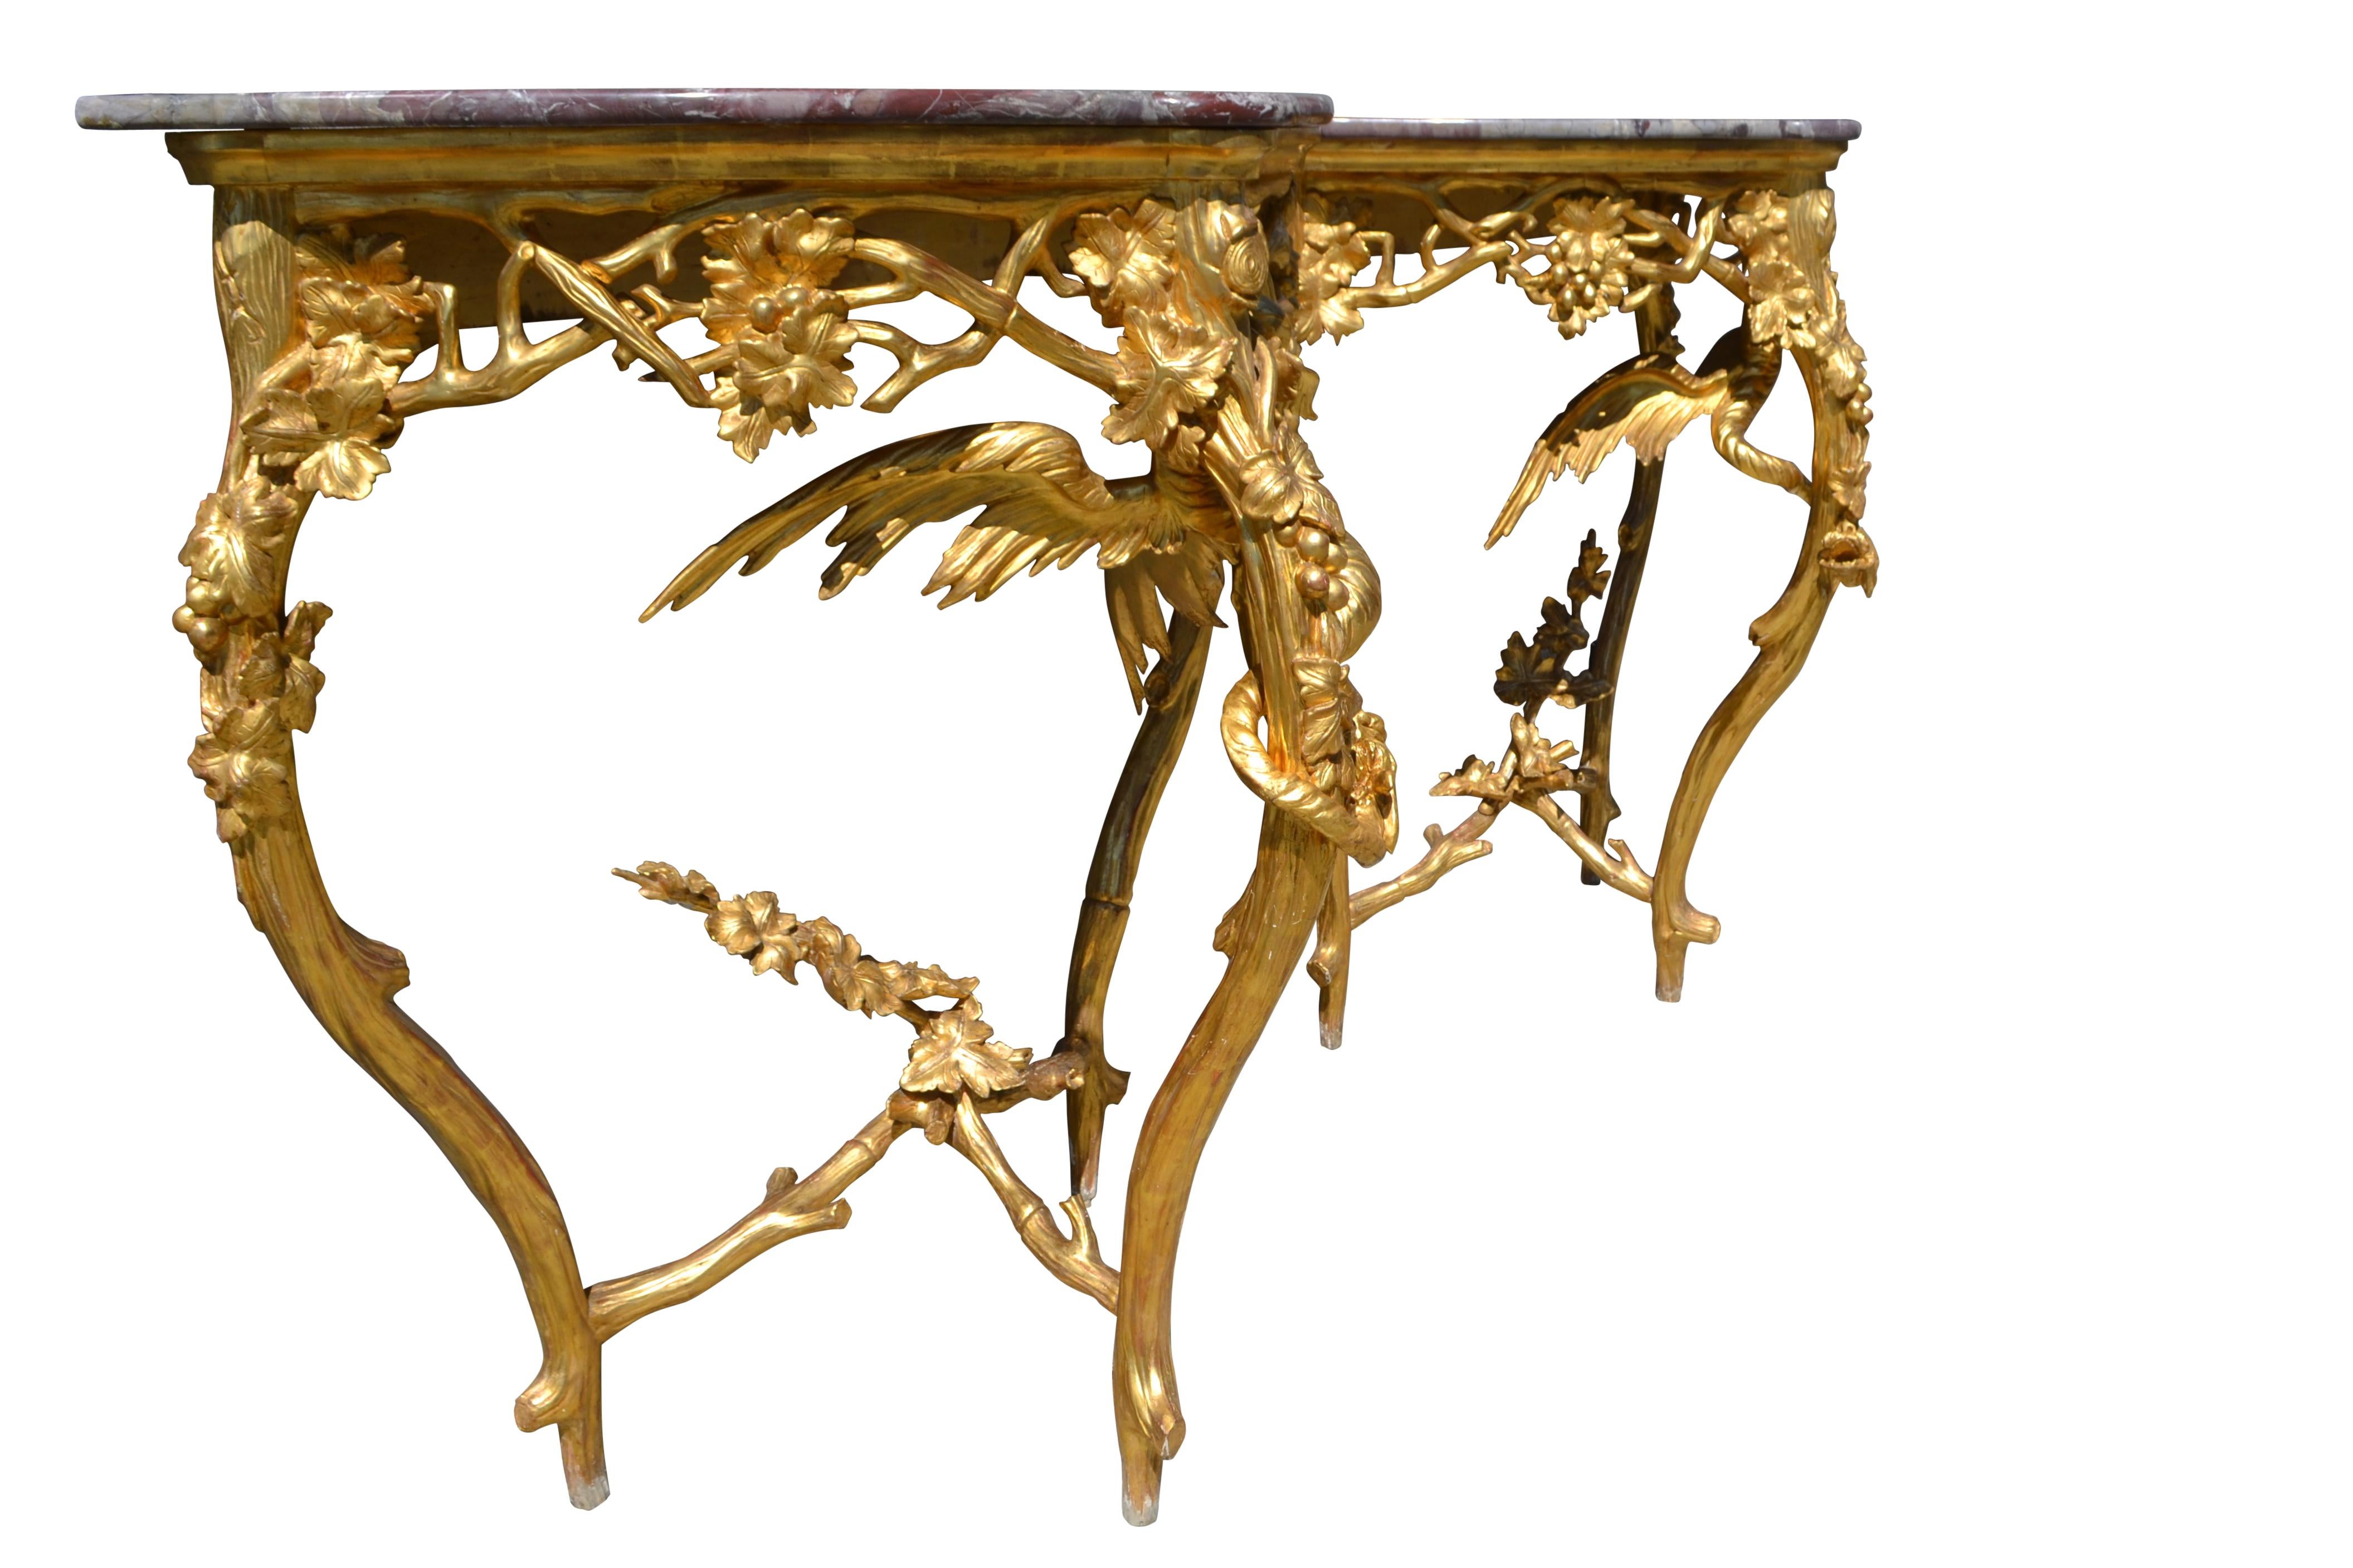 Pair of Venetian 18th-19th Century Rococo Dragon and Bird Mirrors and Consoles In Good Condition For Sale In Vancouver, British Columbia